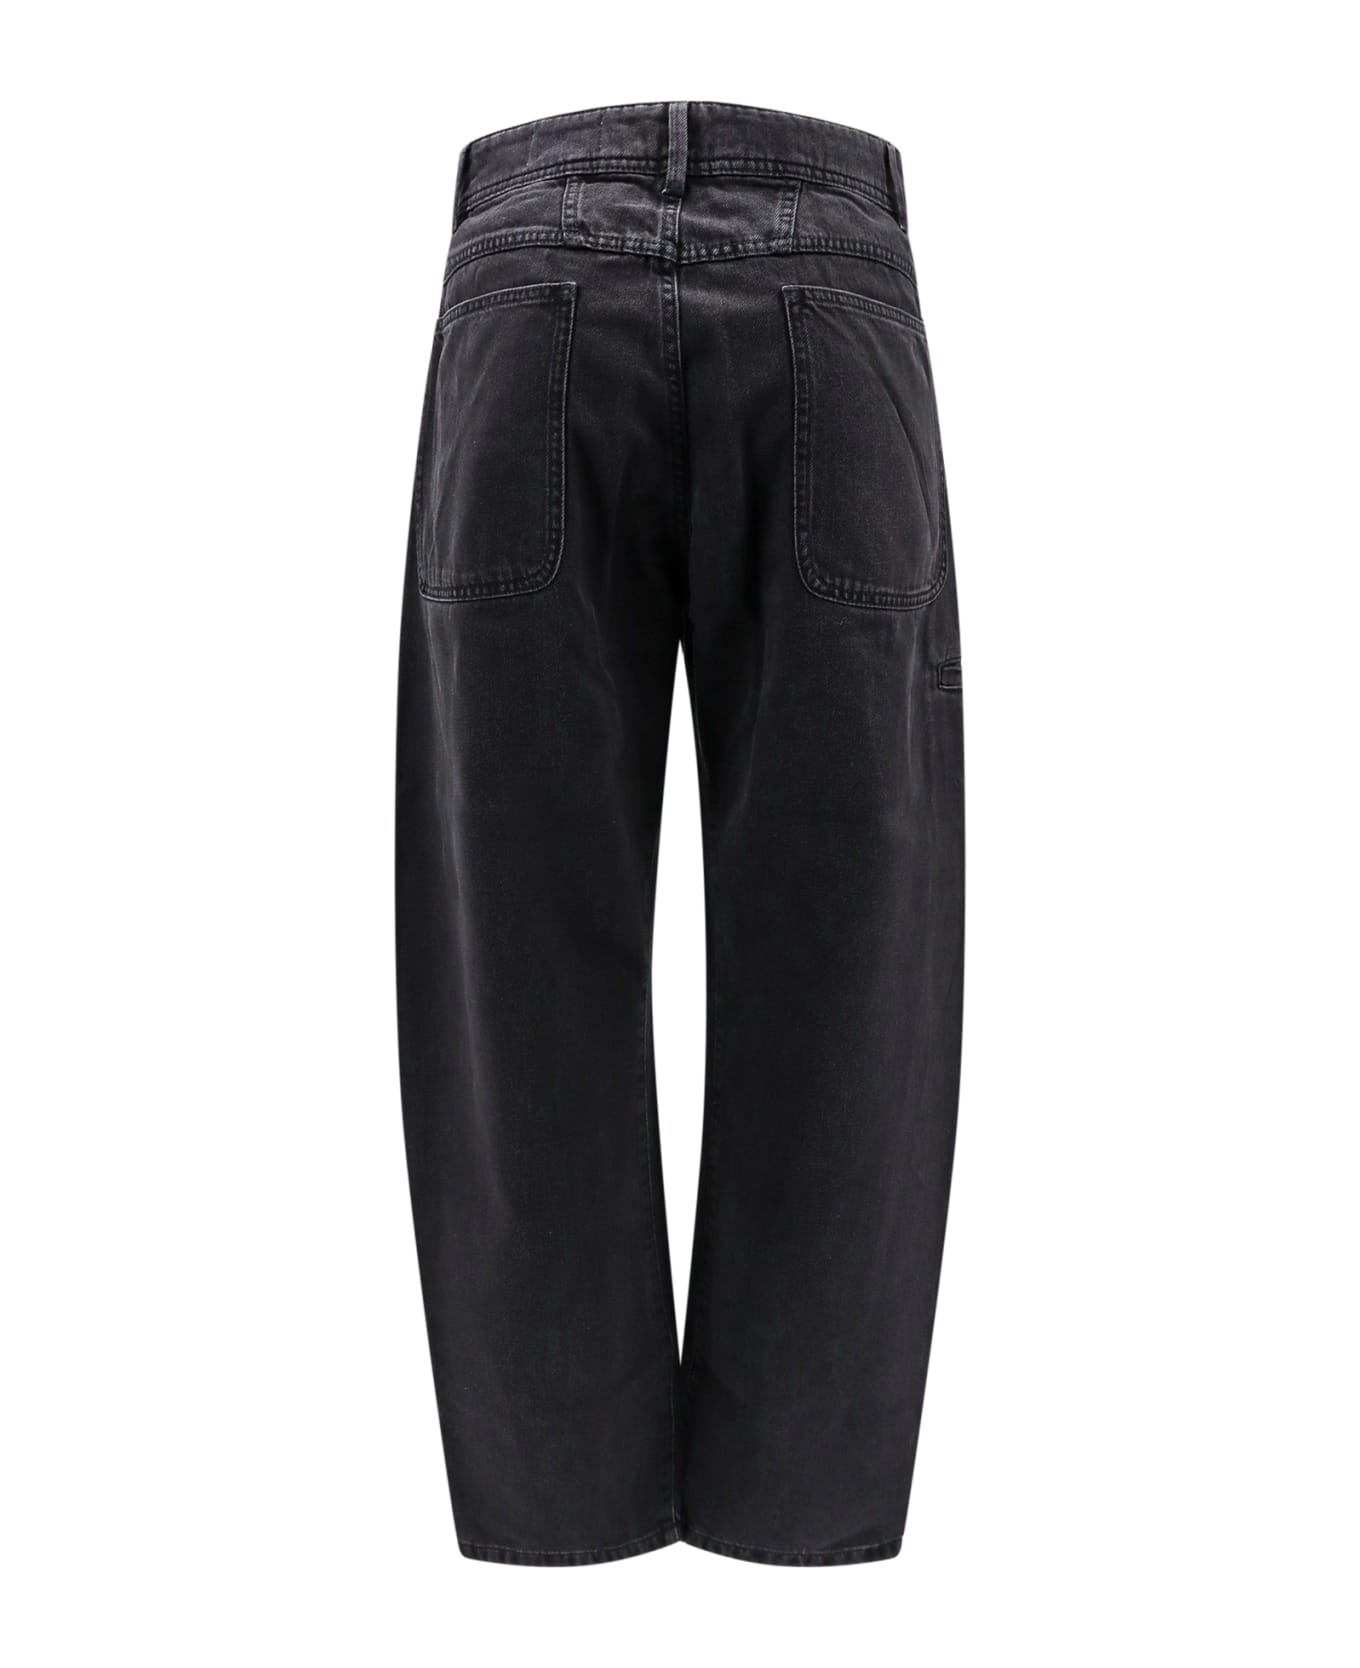 Lemaire Twisted Workwear Pants Jeans - Denim